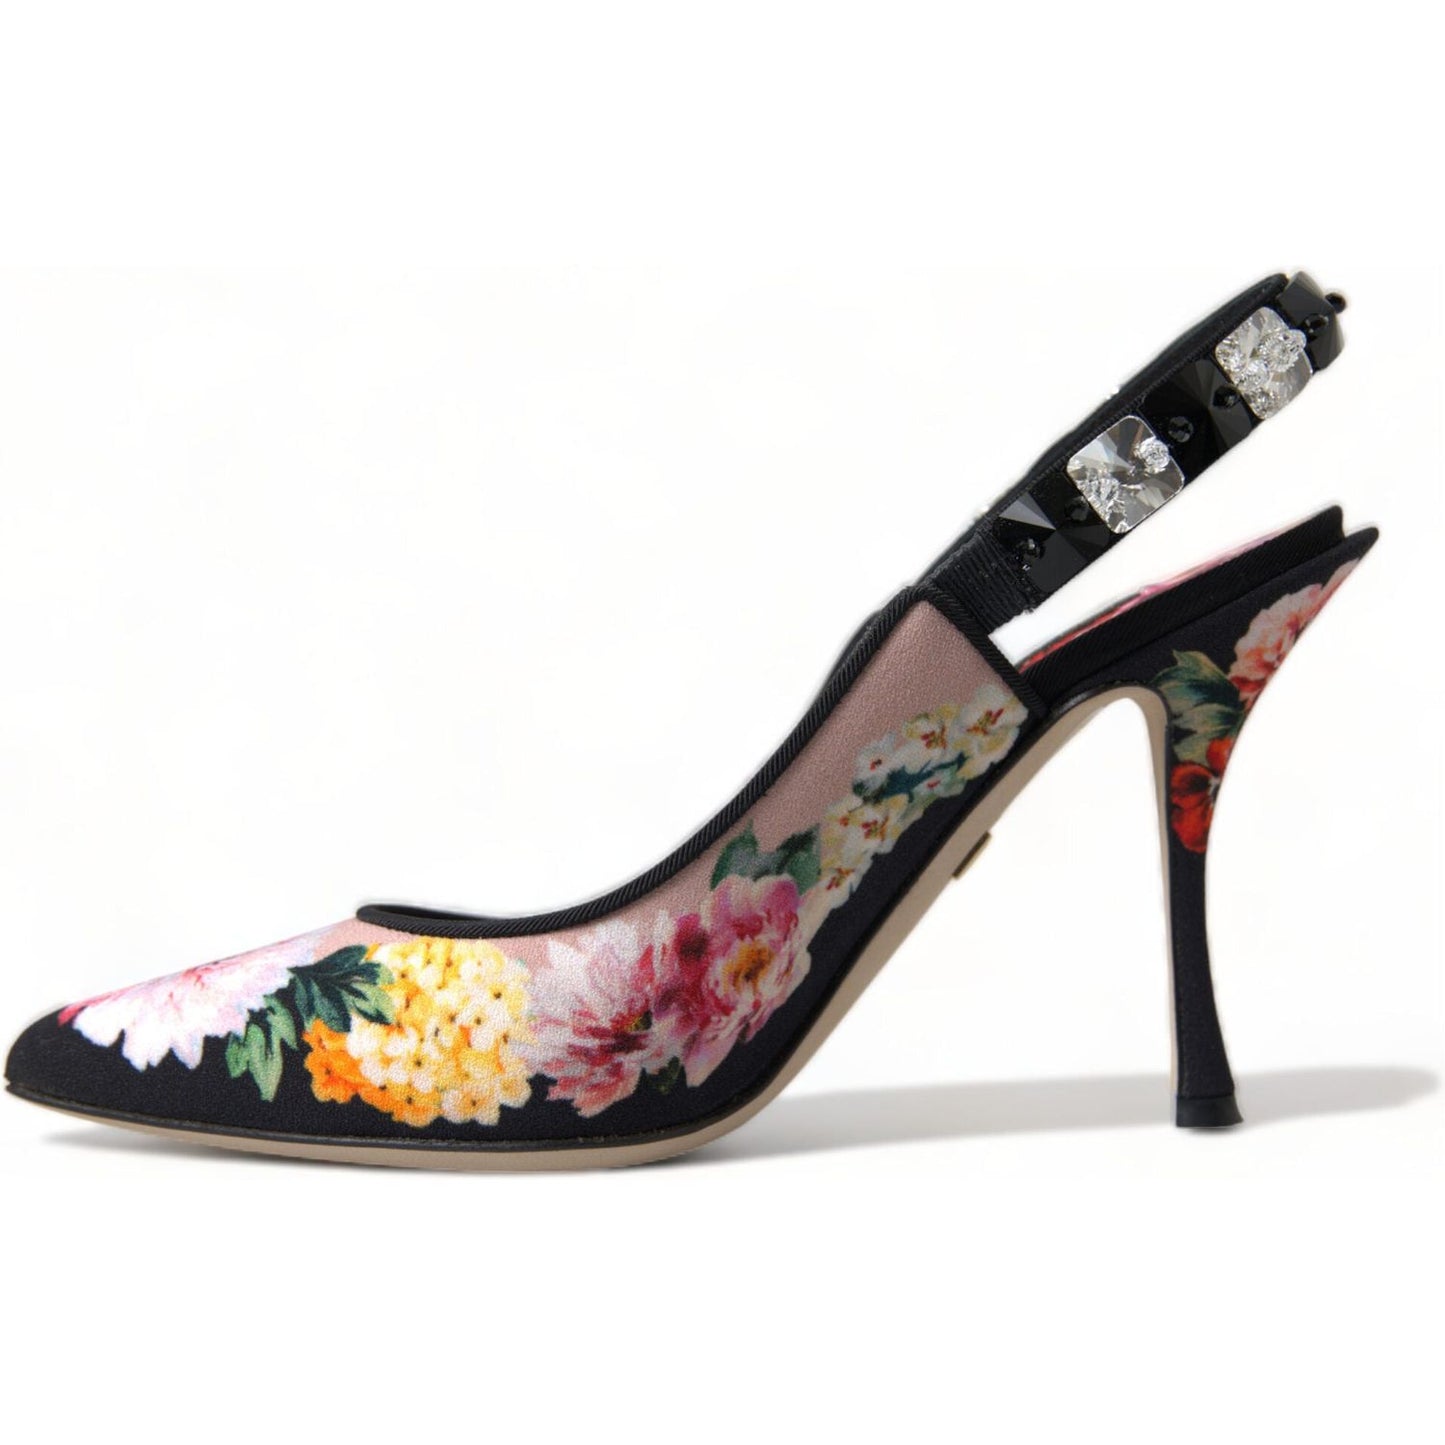 Dolce & Gabbana Floral Slingback Heels with Luxe Crystal Details floral-slingback-heels-with-luxe-crystal-details